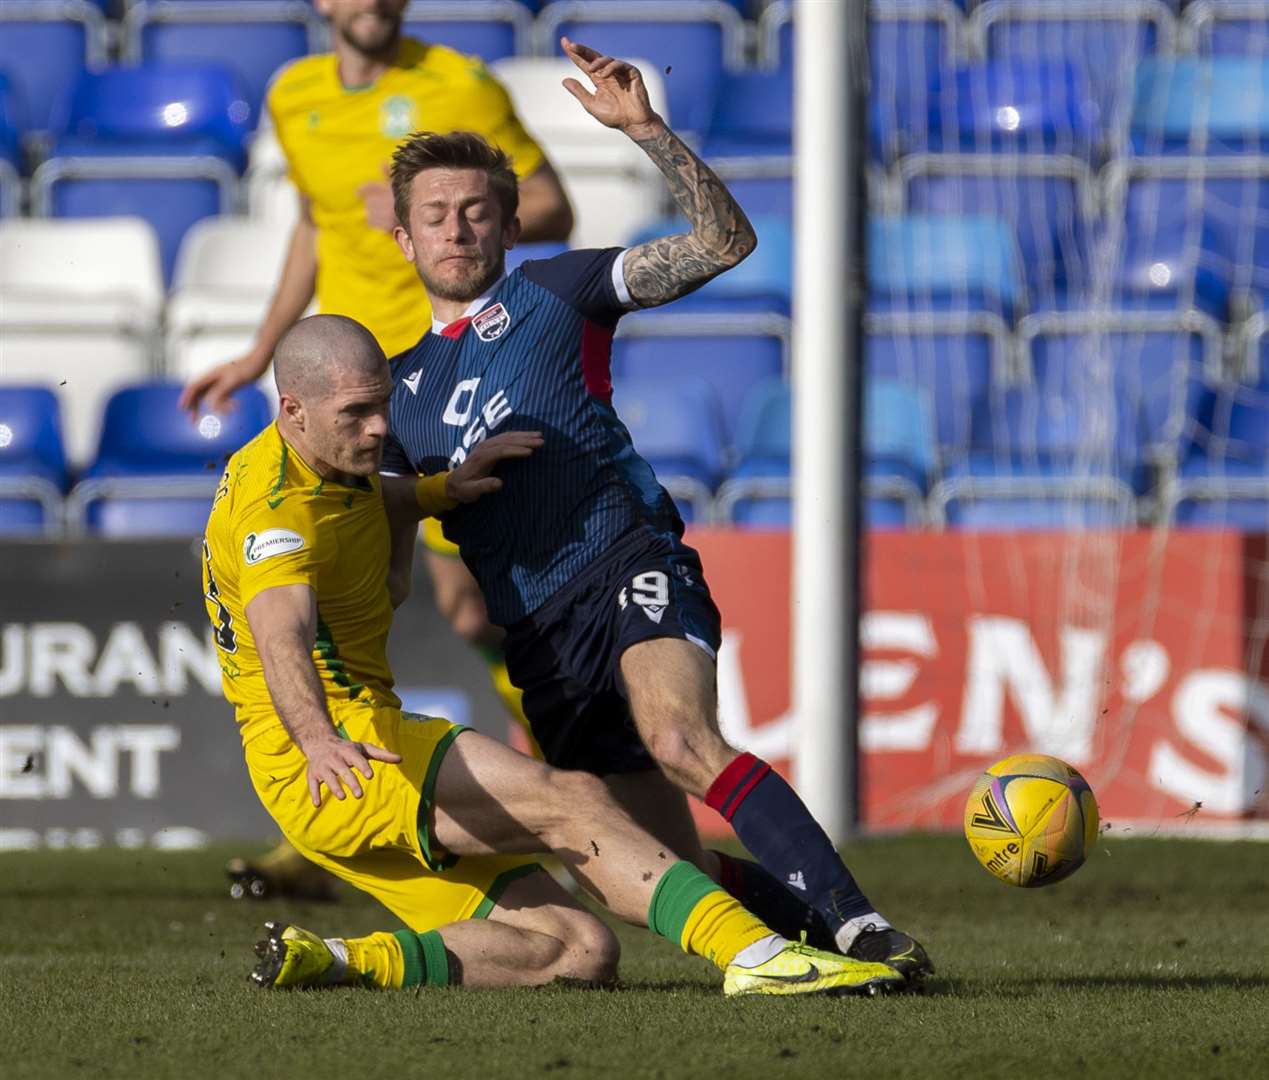 Picture - Ken Macpherson, Inverness. Ross County(1) v Hibs(2). 13.03.21. Ross County's Charlie Lakin clears danger from Hibs’ Alex Gogic.